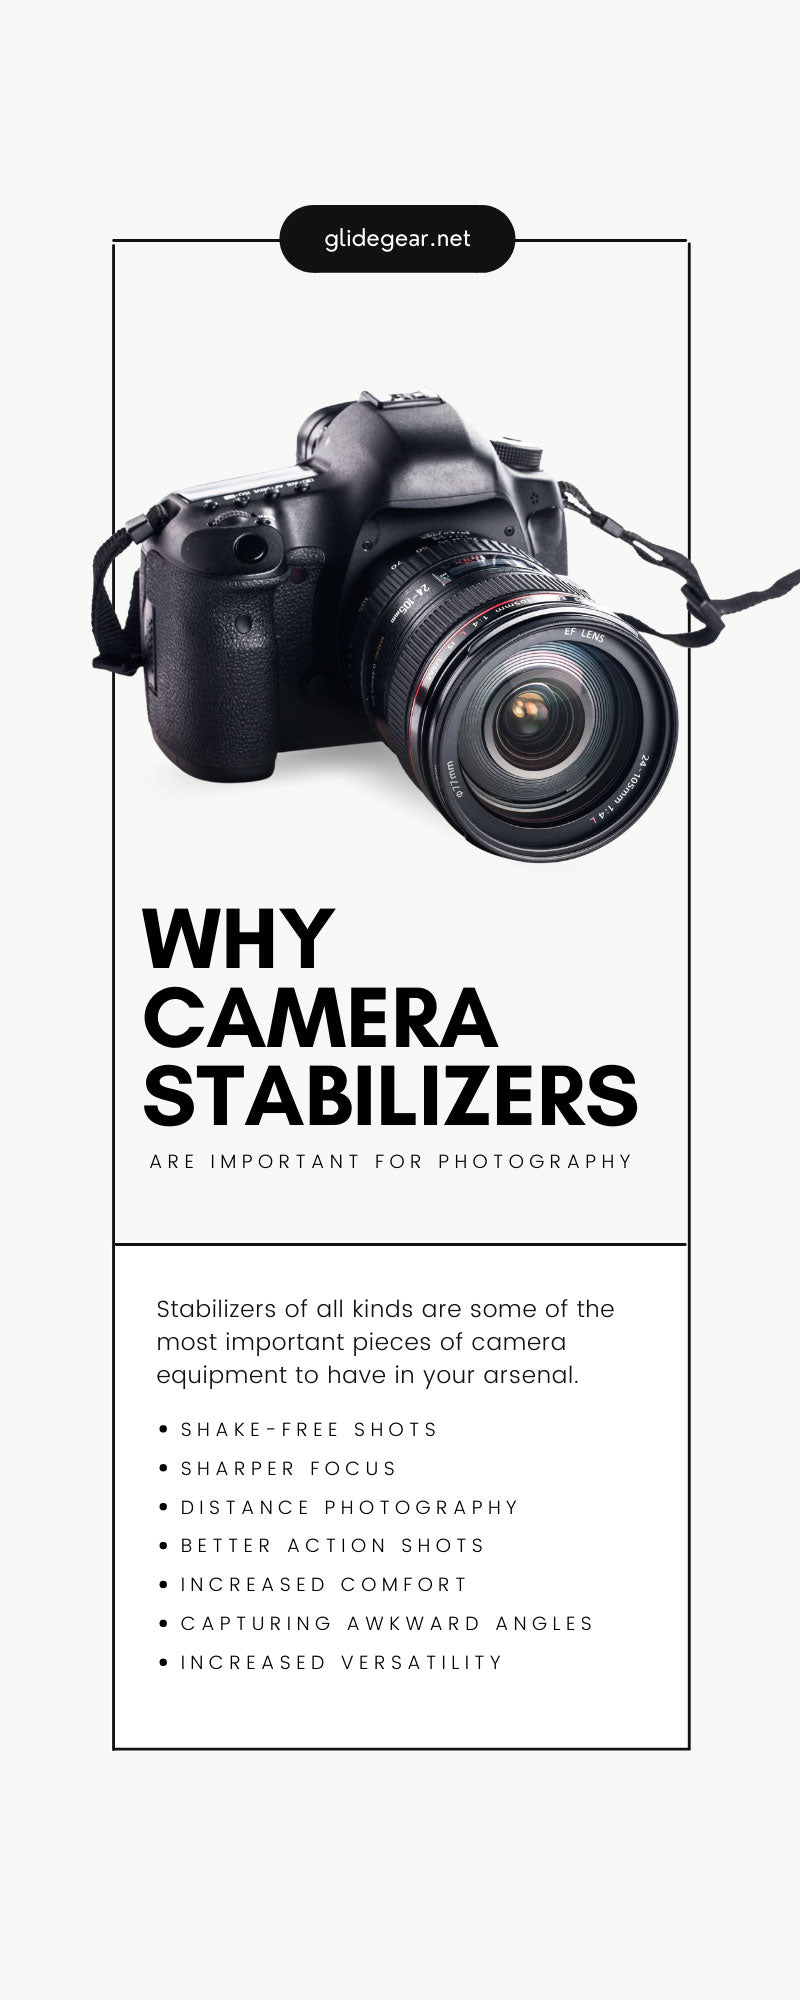 Why Camera Stabilizers Are Important for Photography